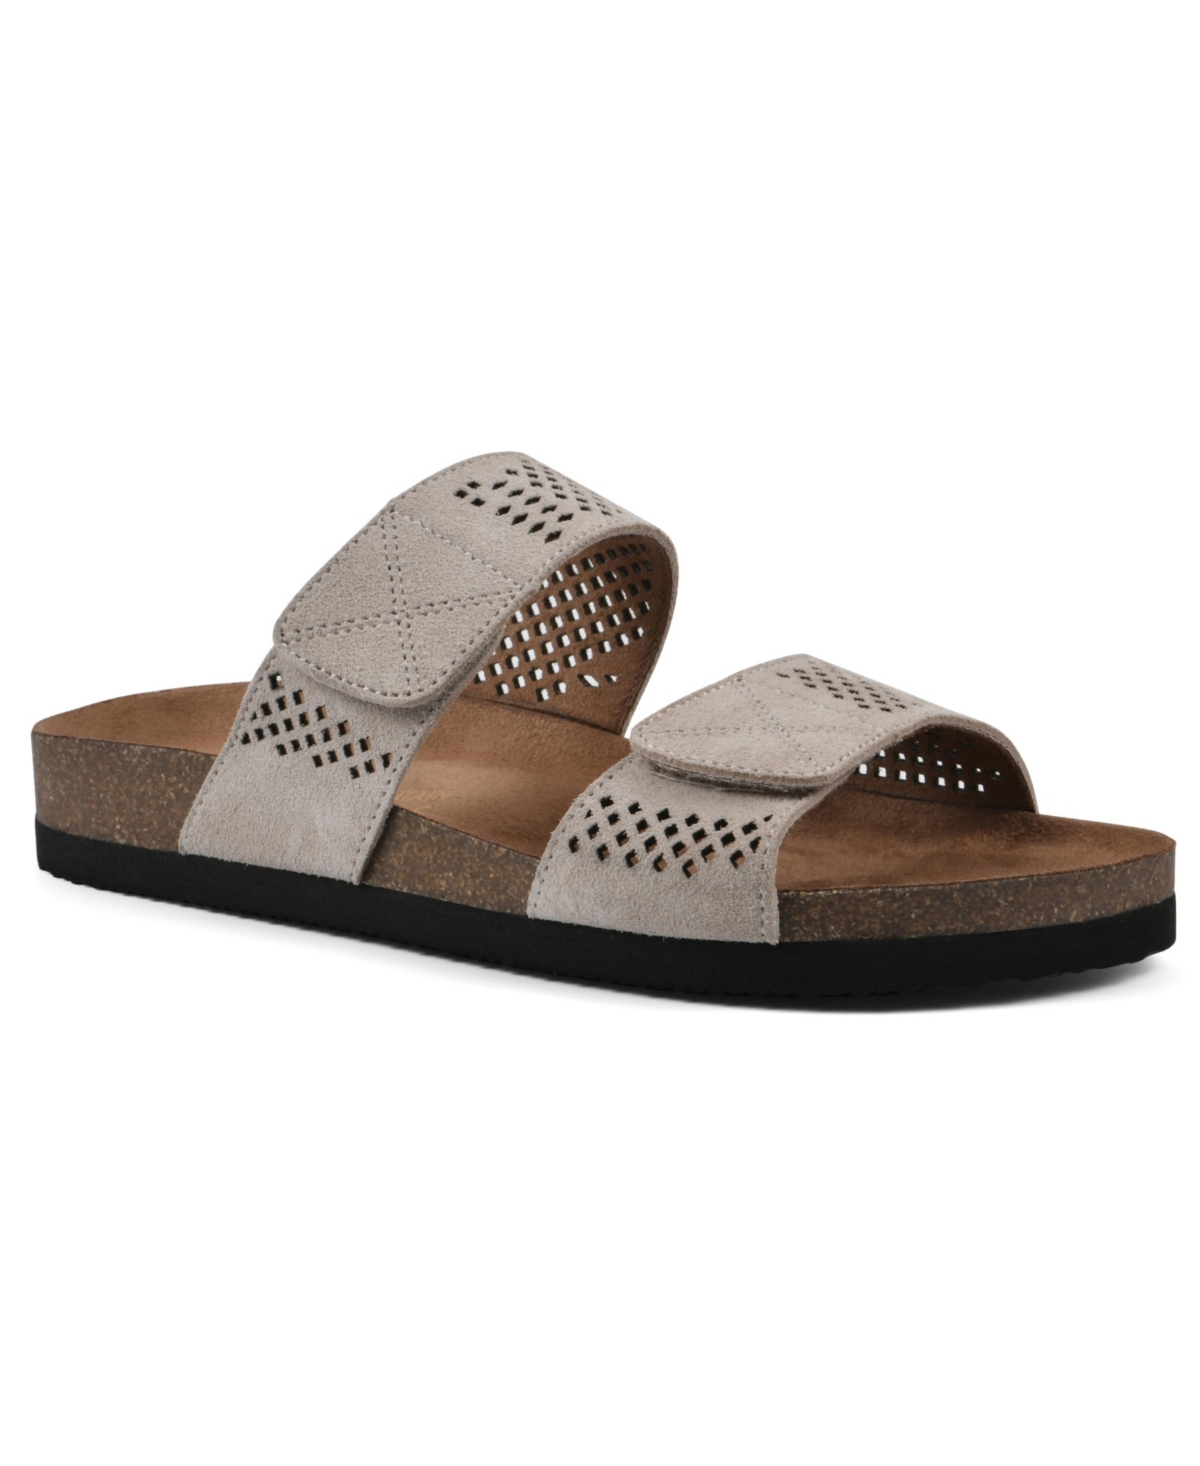 White Mountain Hawkbill Footbed Sandals In Sandal Wood Leather